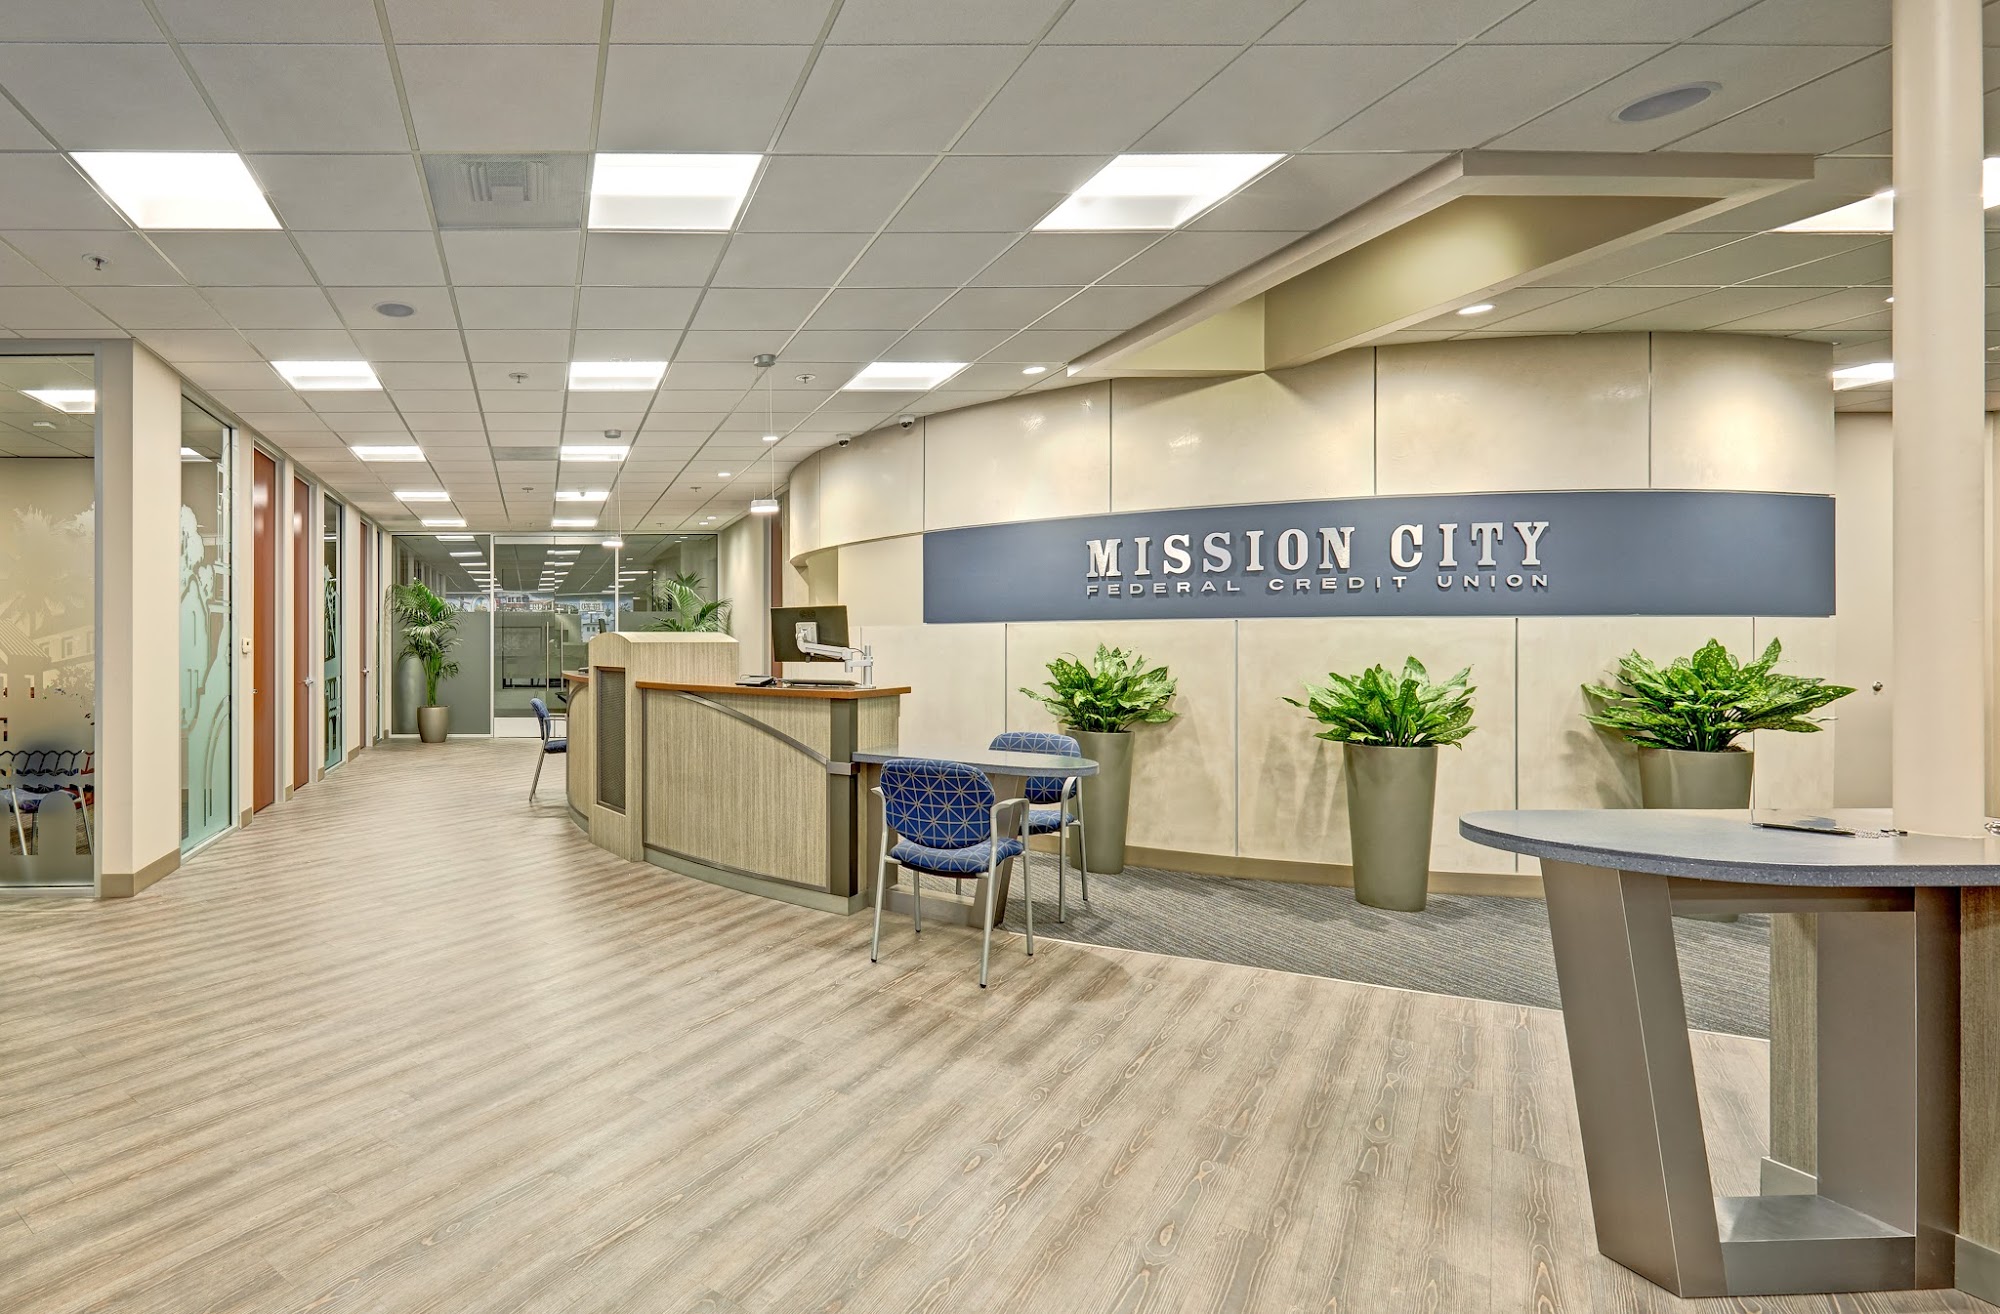 Mission City Federal Credit Union